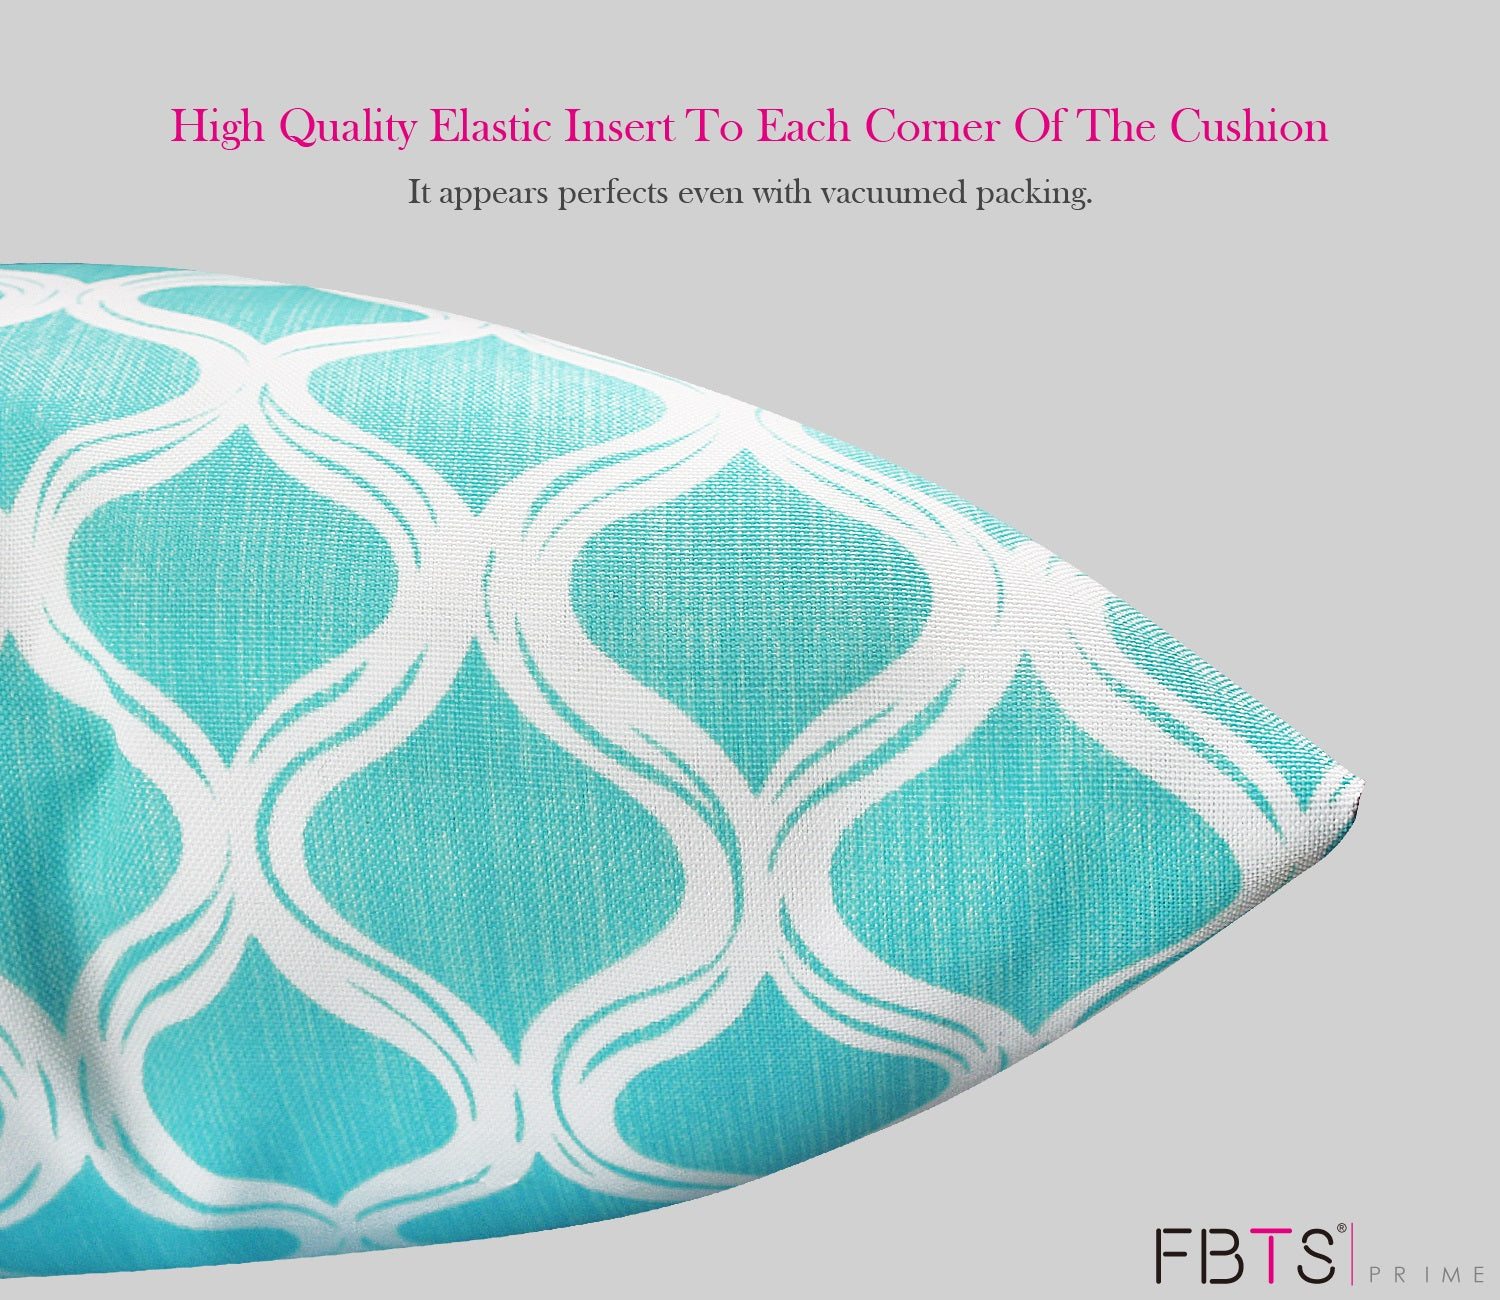 Outdoor Pillows with Insert Blue Geometric Patio Accent Throw Pillows 18x18 inch Square Decorative Pillows